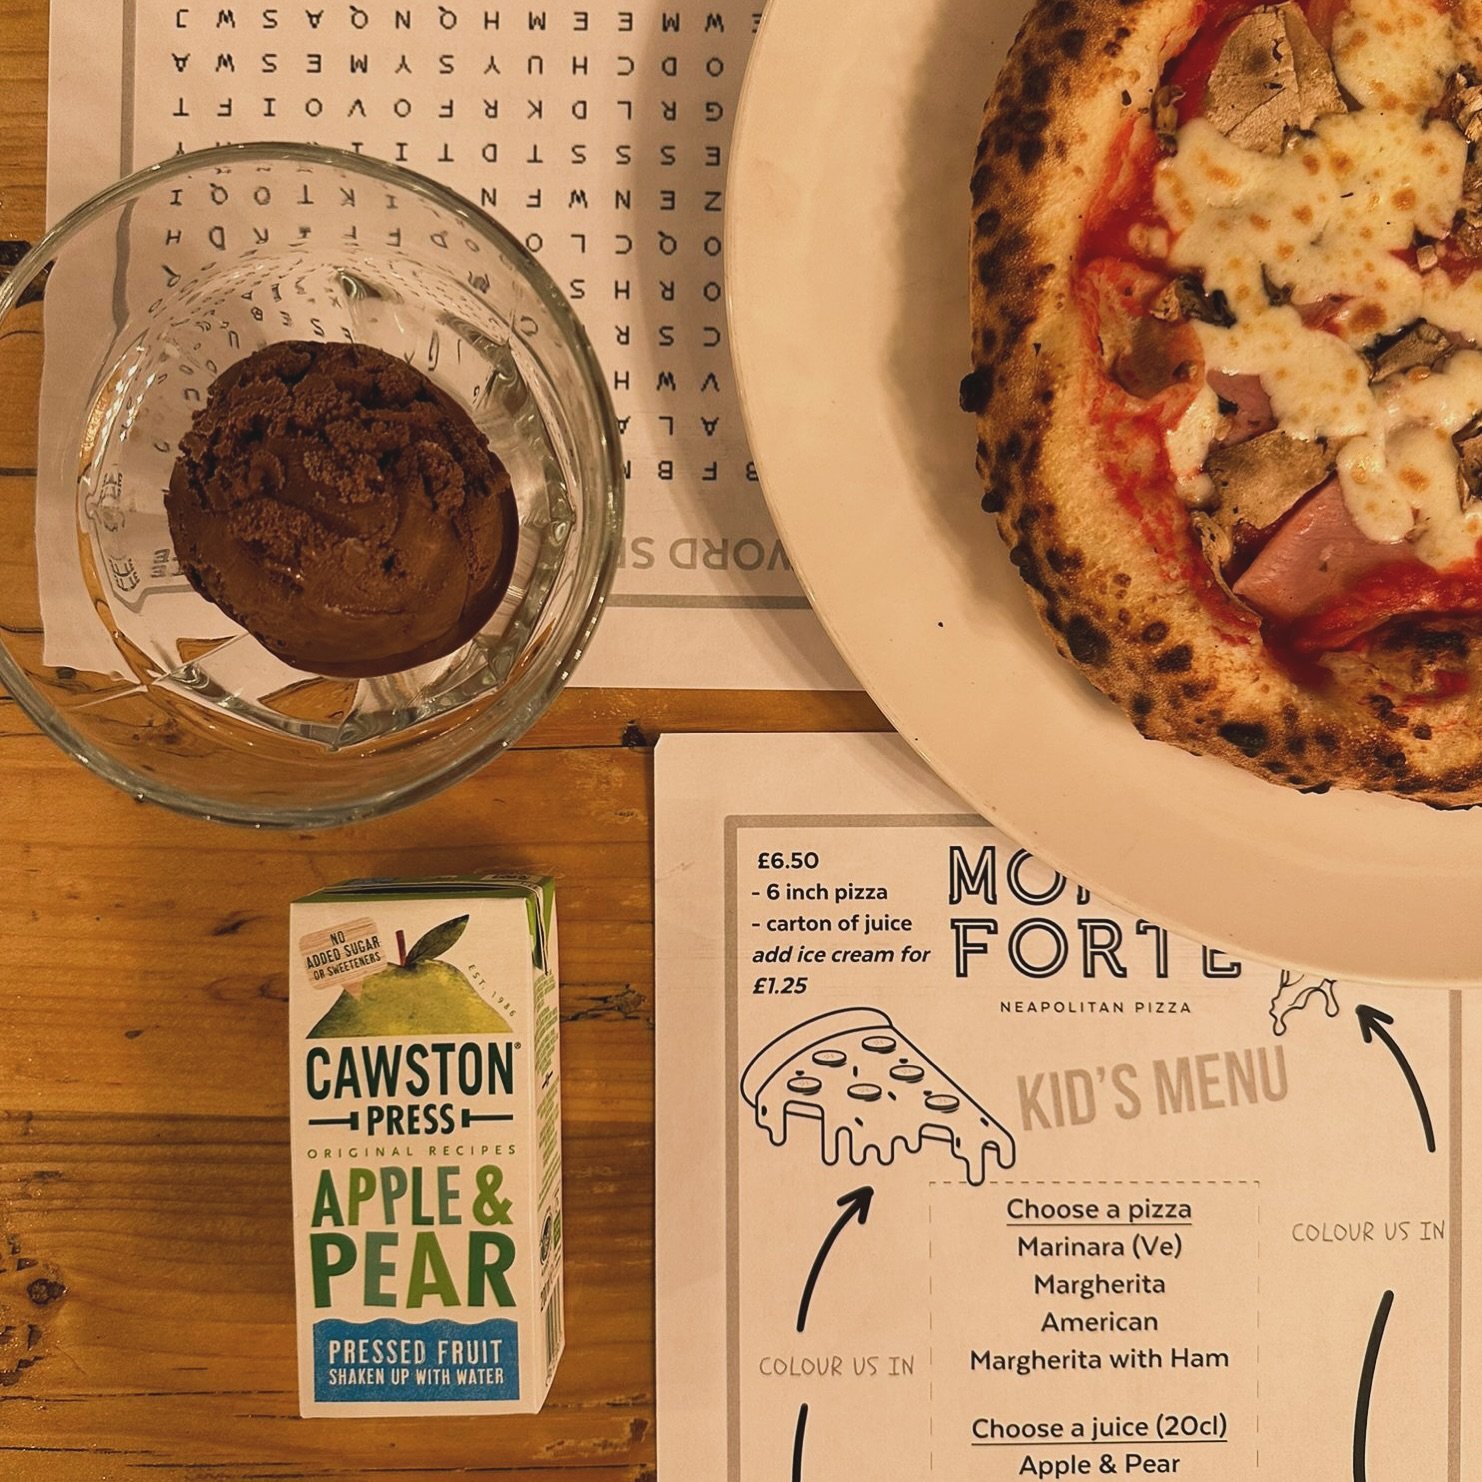 Our Kids Menu is available EVERY single day at Monte Forte Reigate &amp; Horsham 😇

Choose a pizza and a juice carton for &pound;6.50 ❤️ ADD a scoop of ice cream for &pound;1.25 🍨

#kidsmenu #pizzatime #reigatemums #horsham #reigate #pizzalover